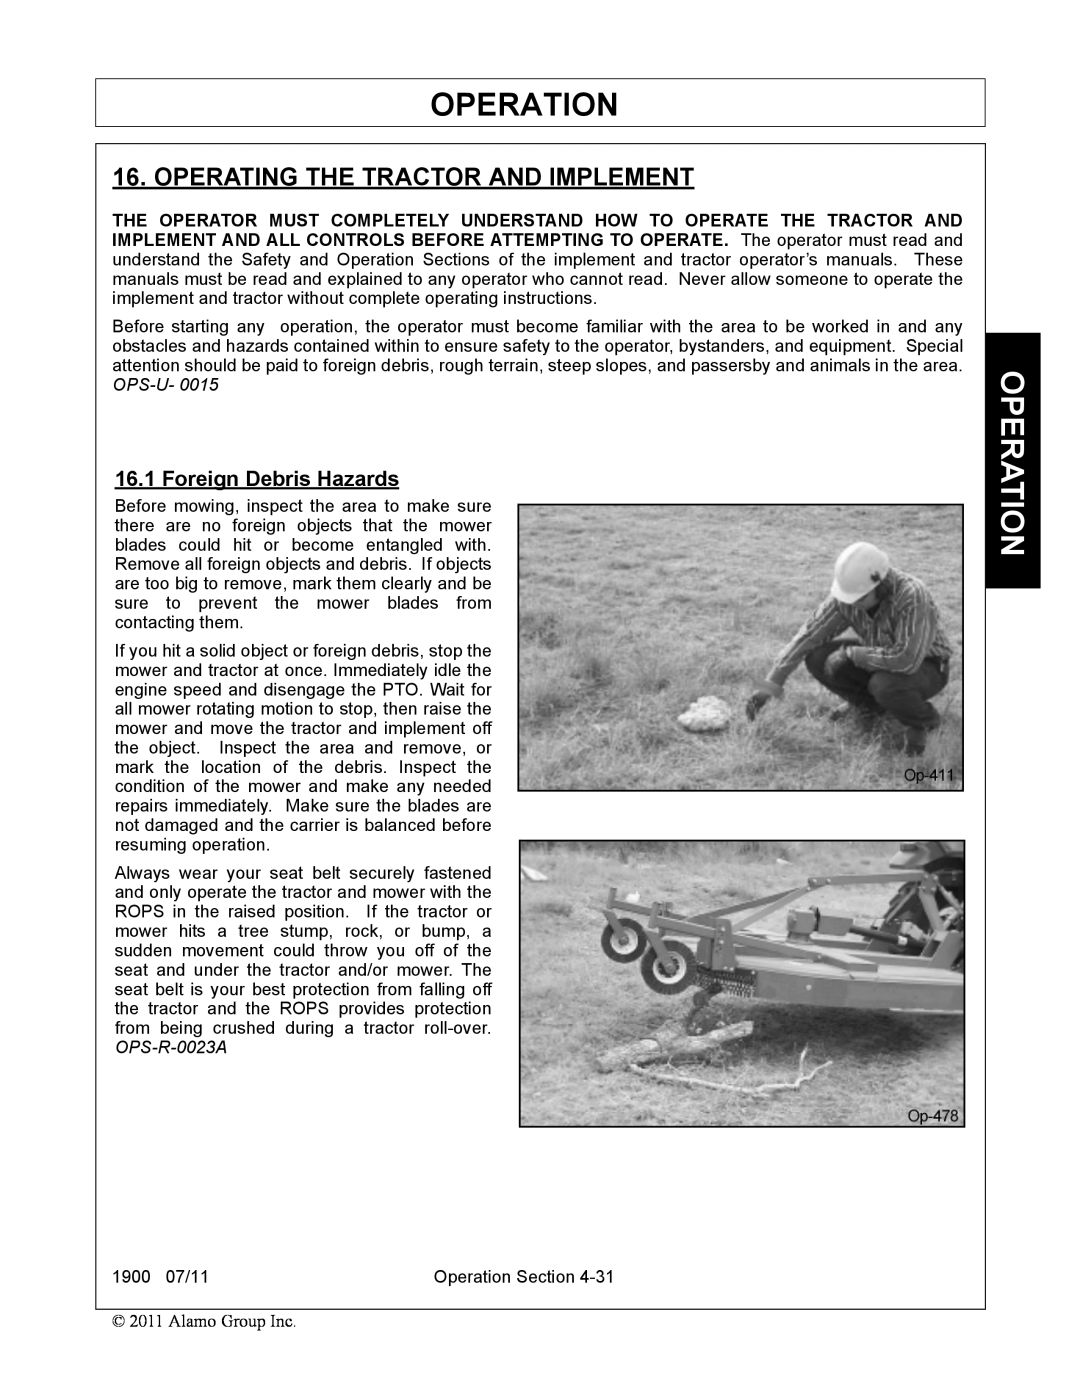 Alamo 1900 manual Operating The Tractor And Implement, Operation, Foreign Debris Hazards 